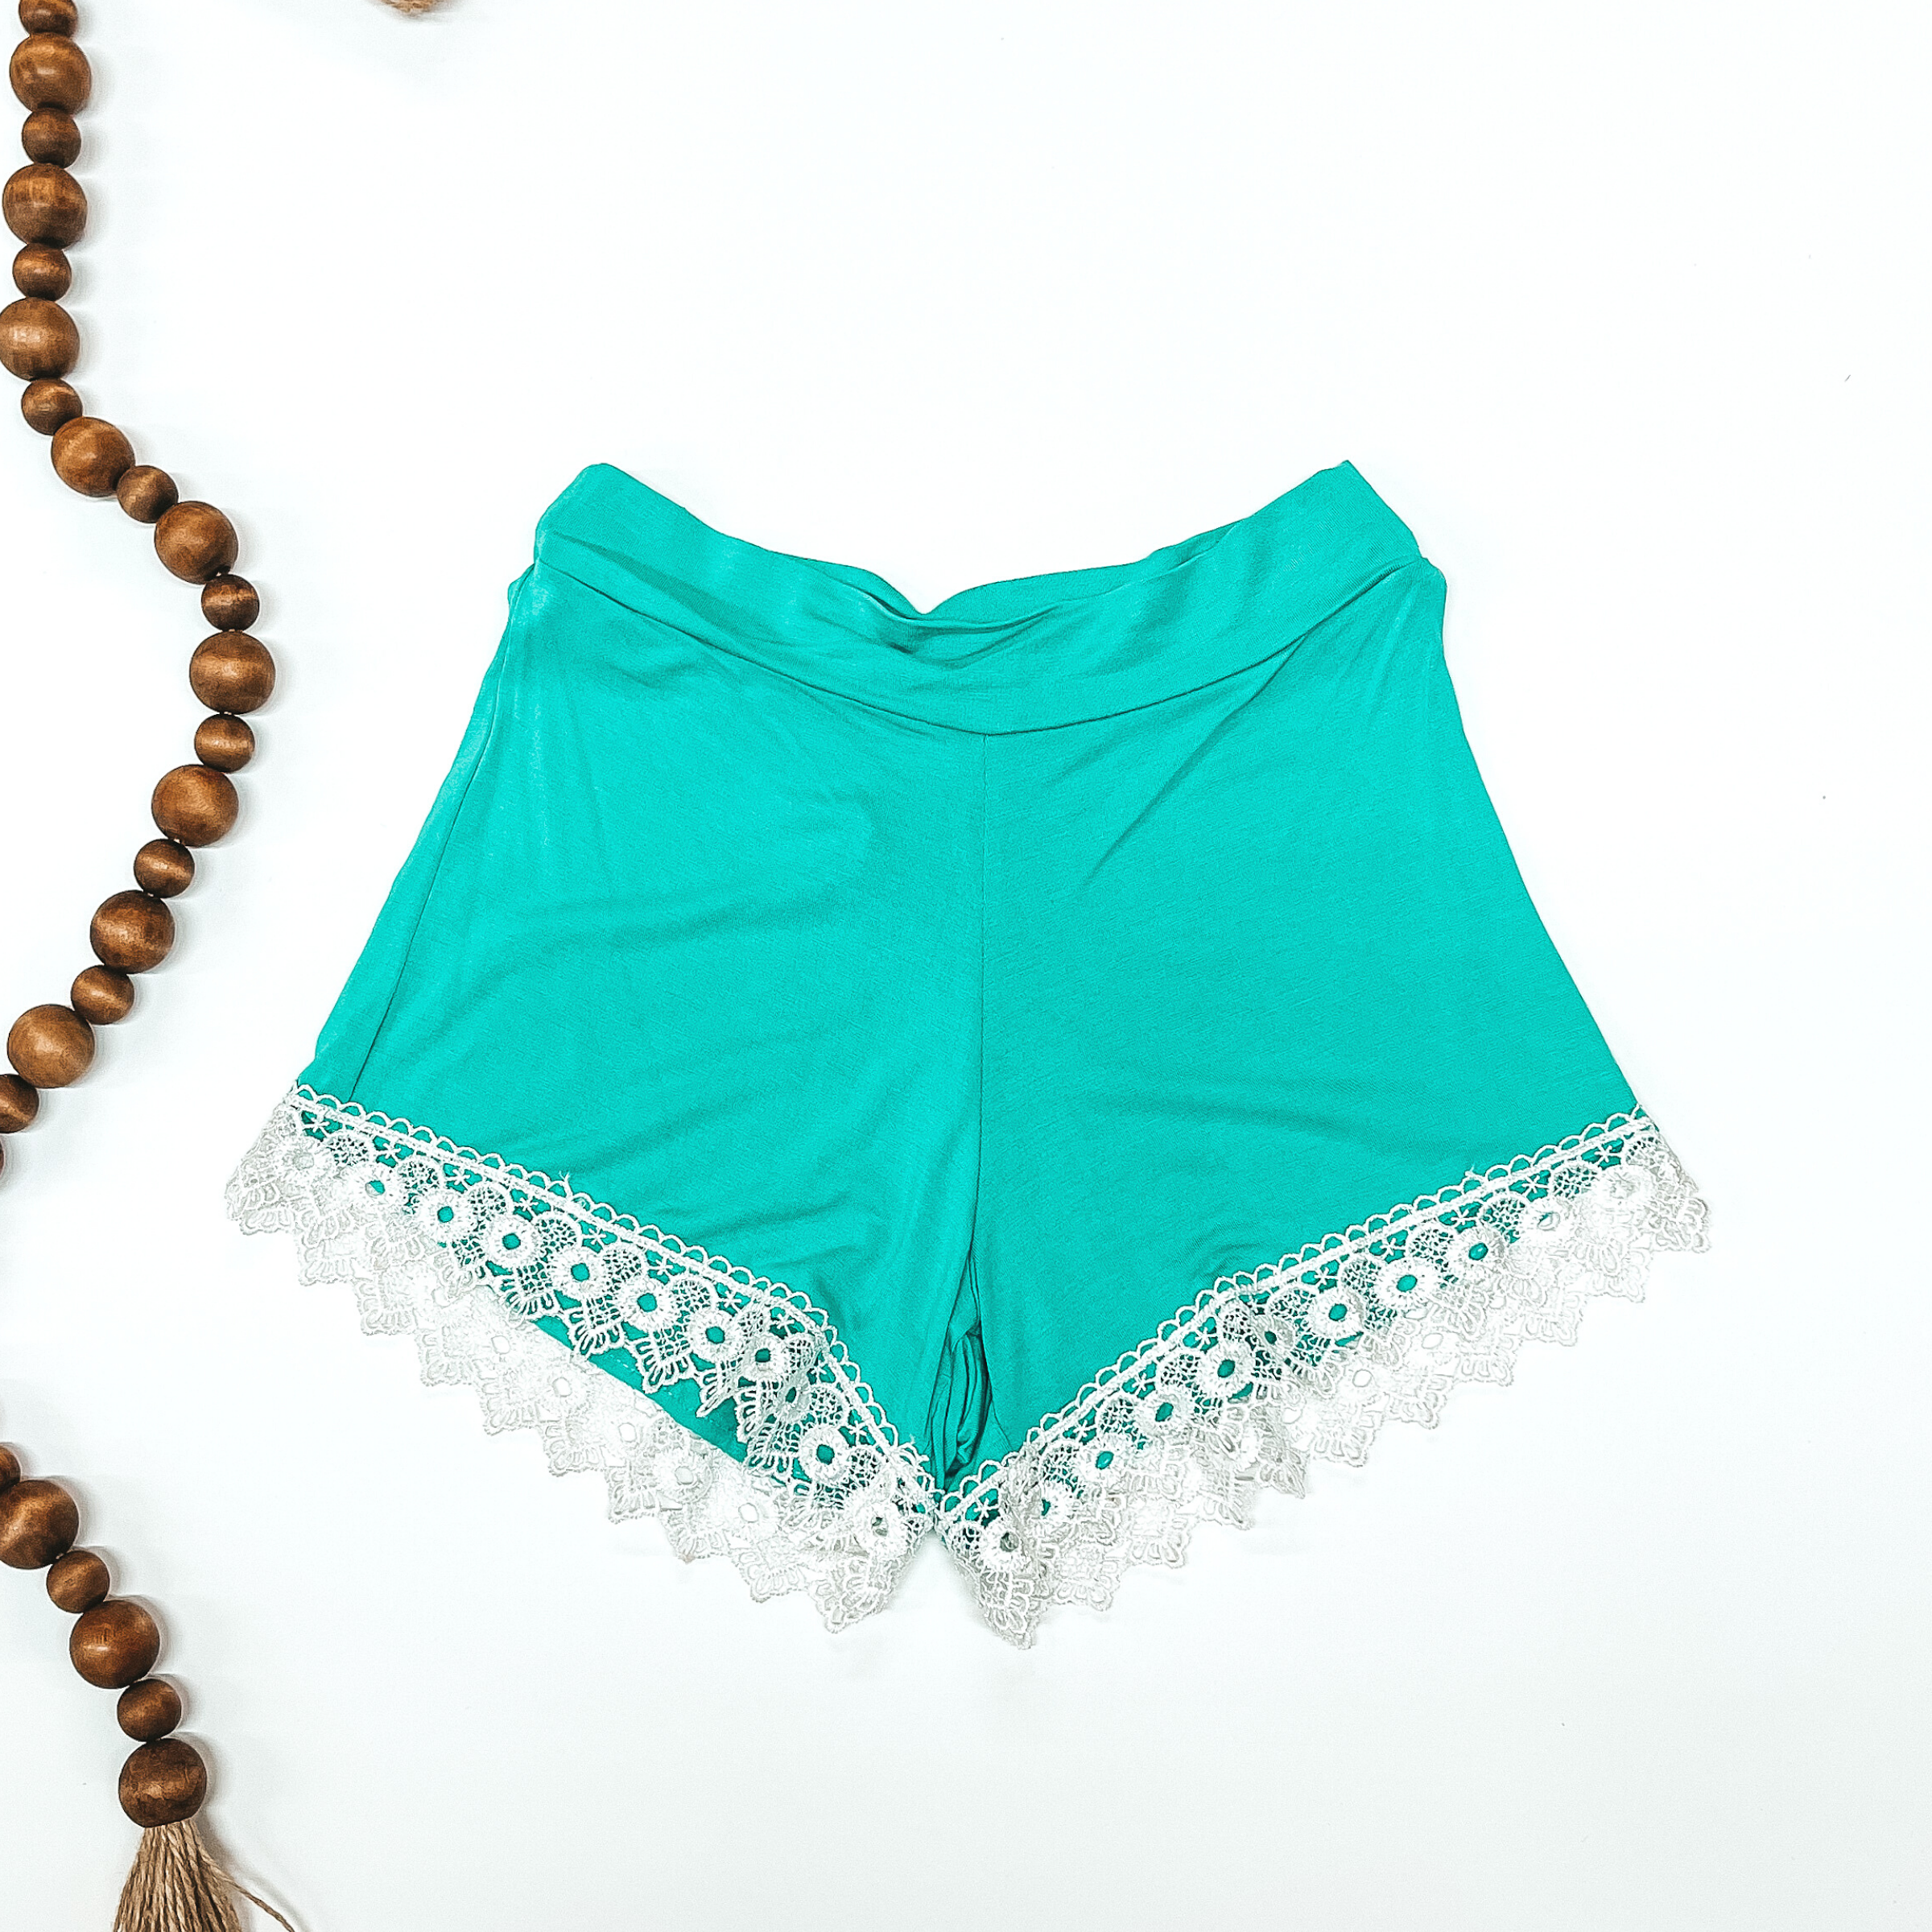 Turquoise Shorts with Lace Trim - Giddy Up Glamour Boutique